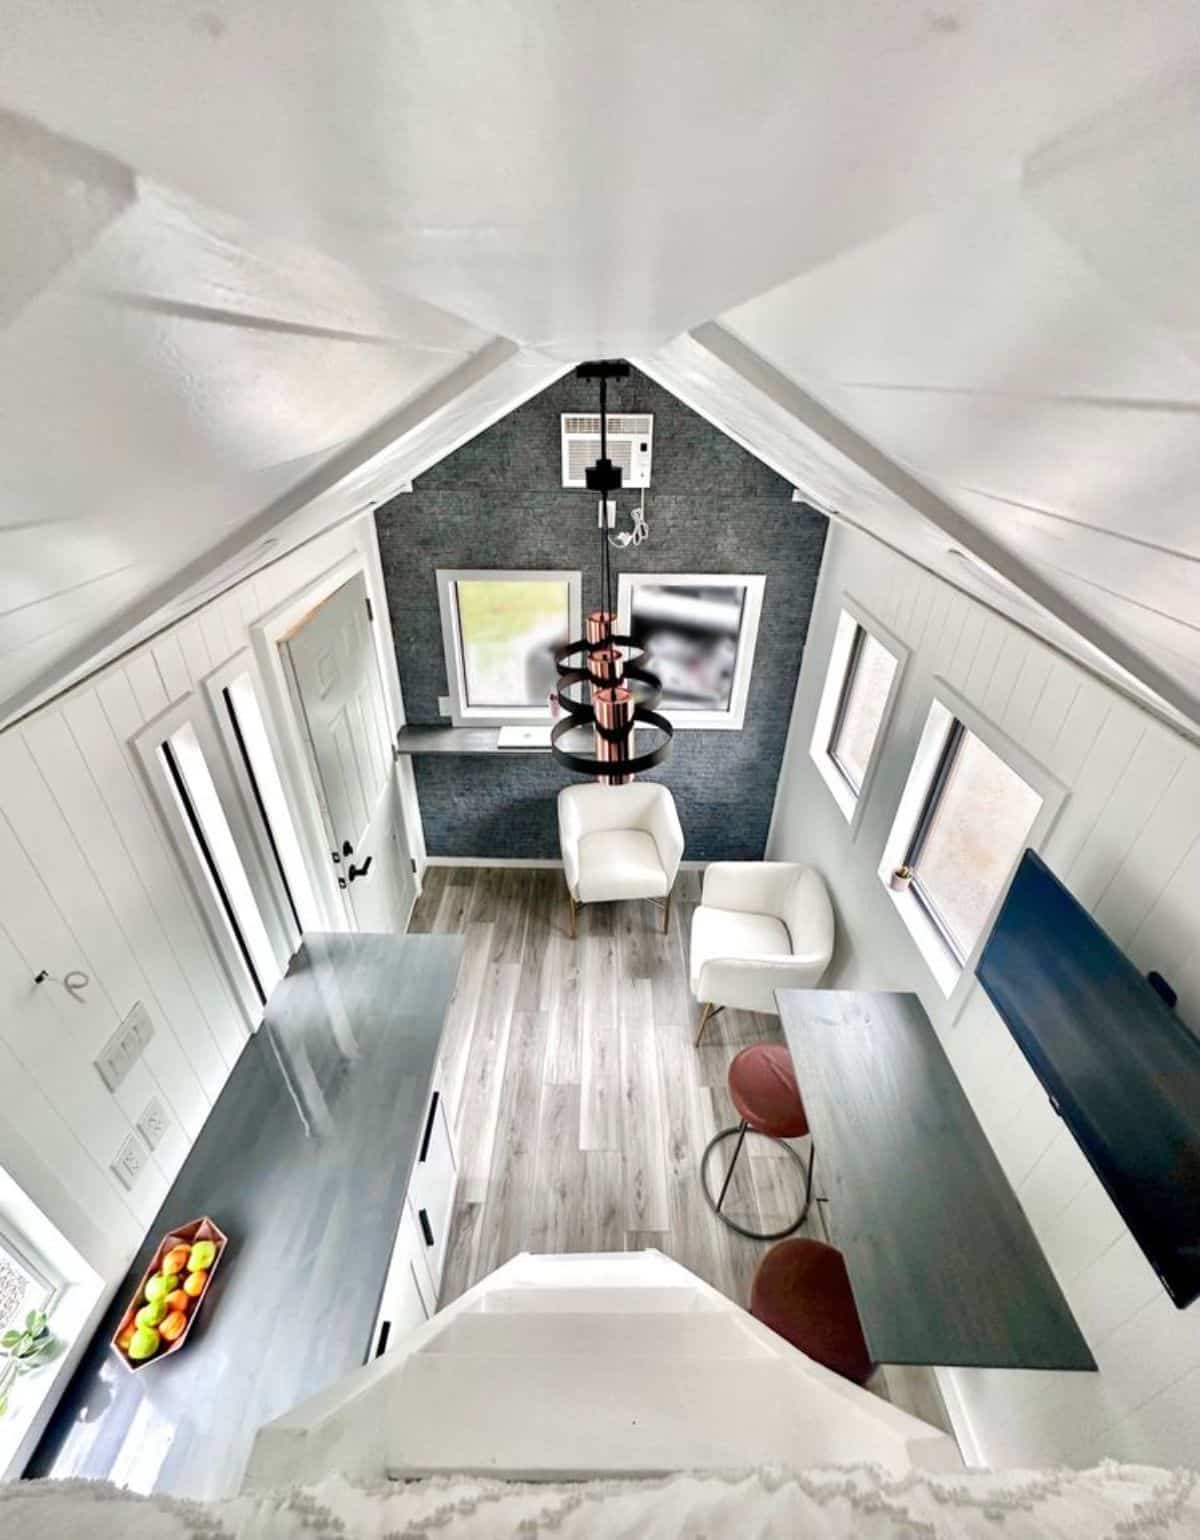 Ariel view of furnished micro home from inside